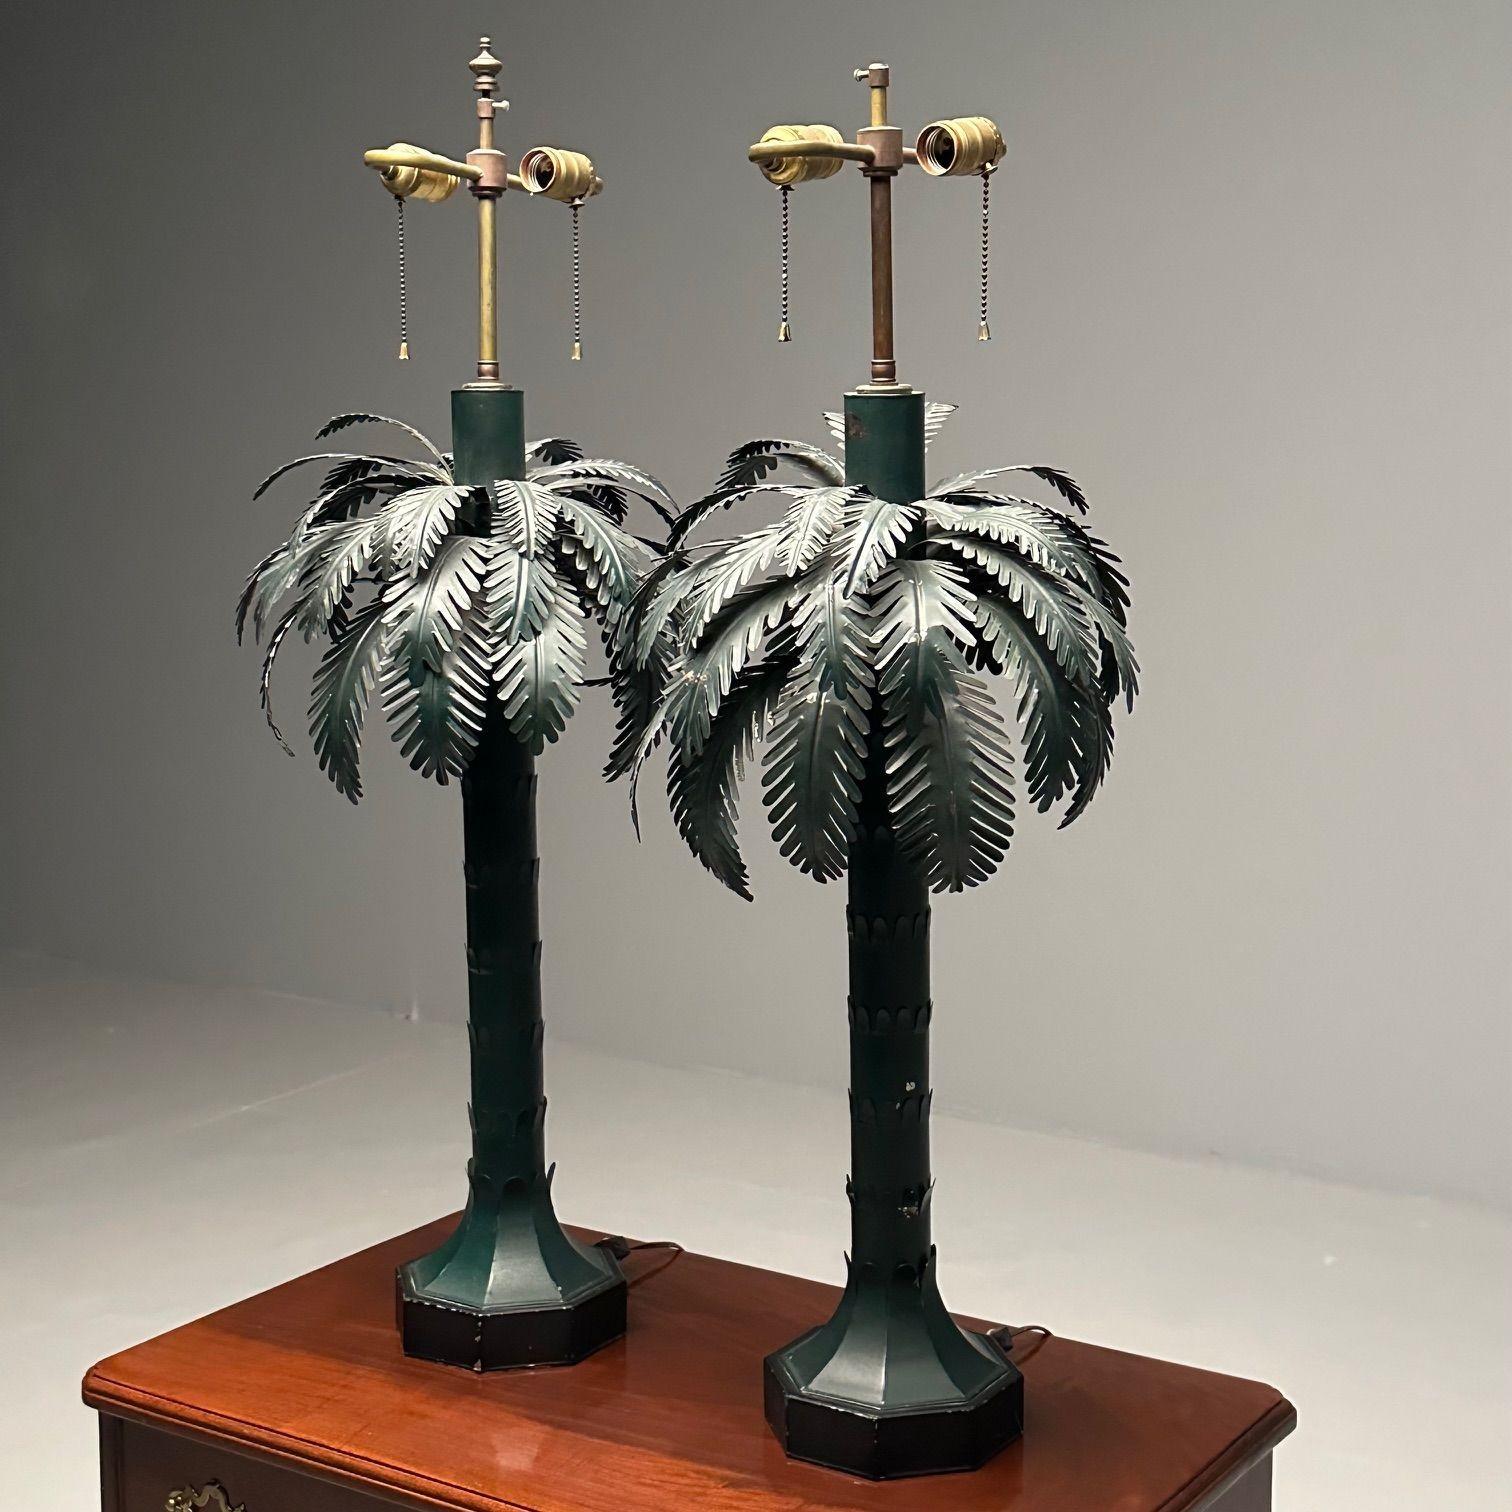 Maison Jansen Style, Mid-Century Modern, Palm Tree Lamps, Green, Metal, 1970s For Sale 4